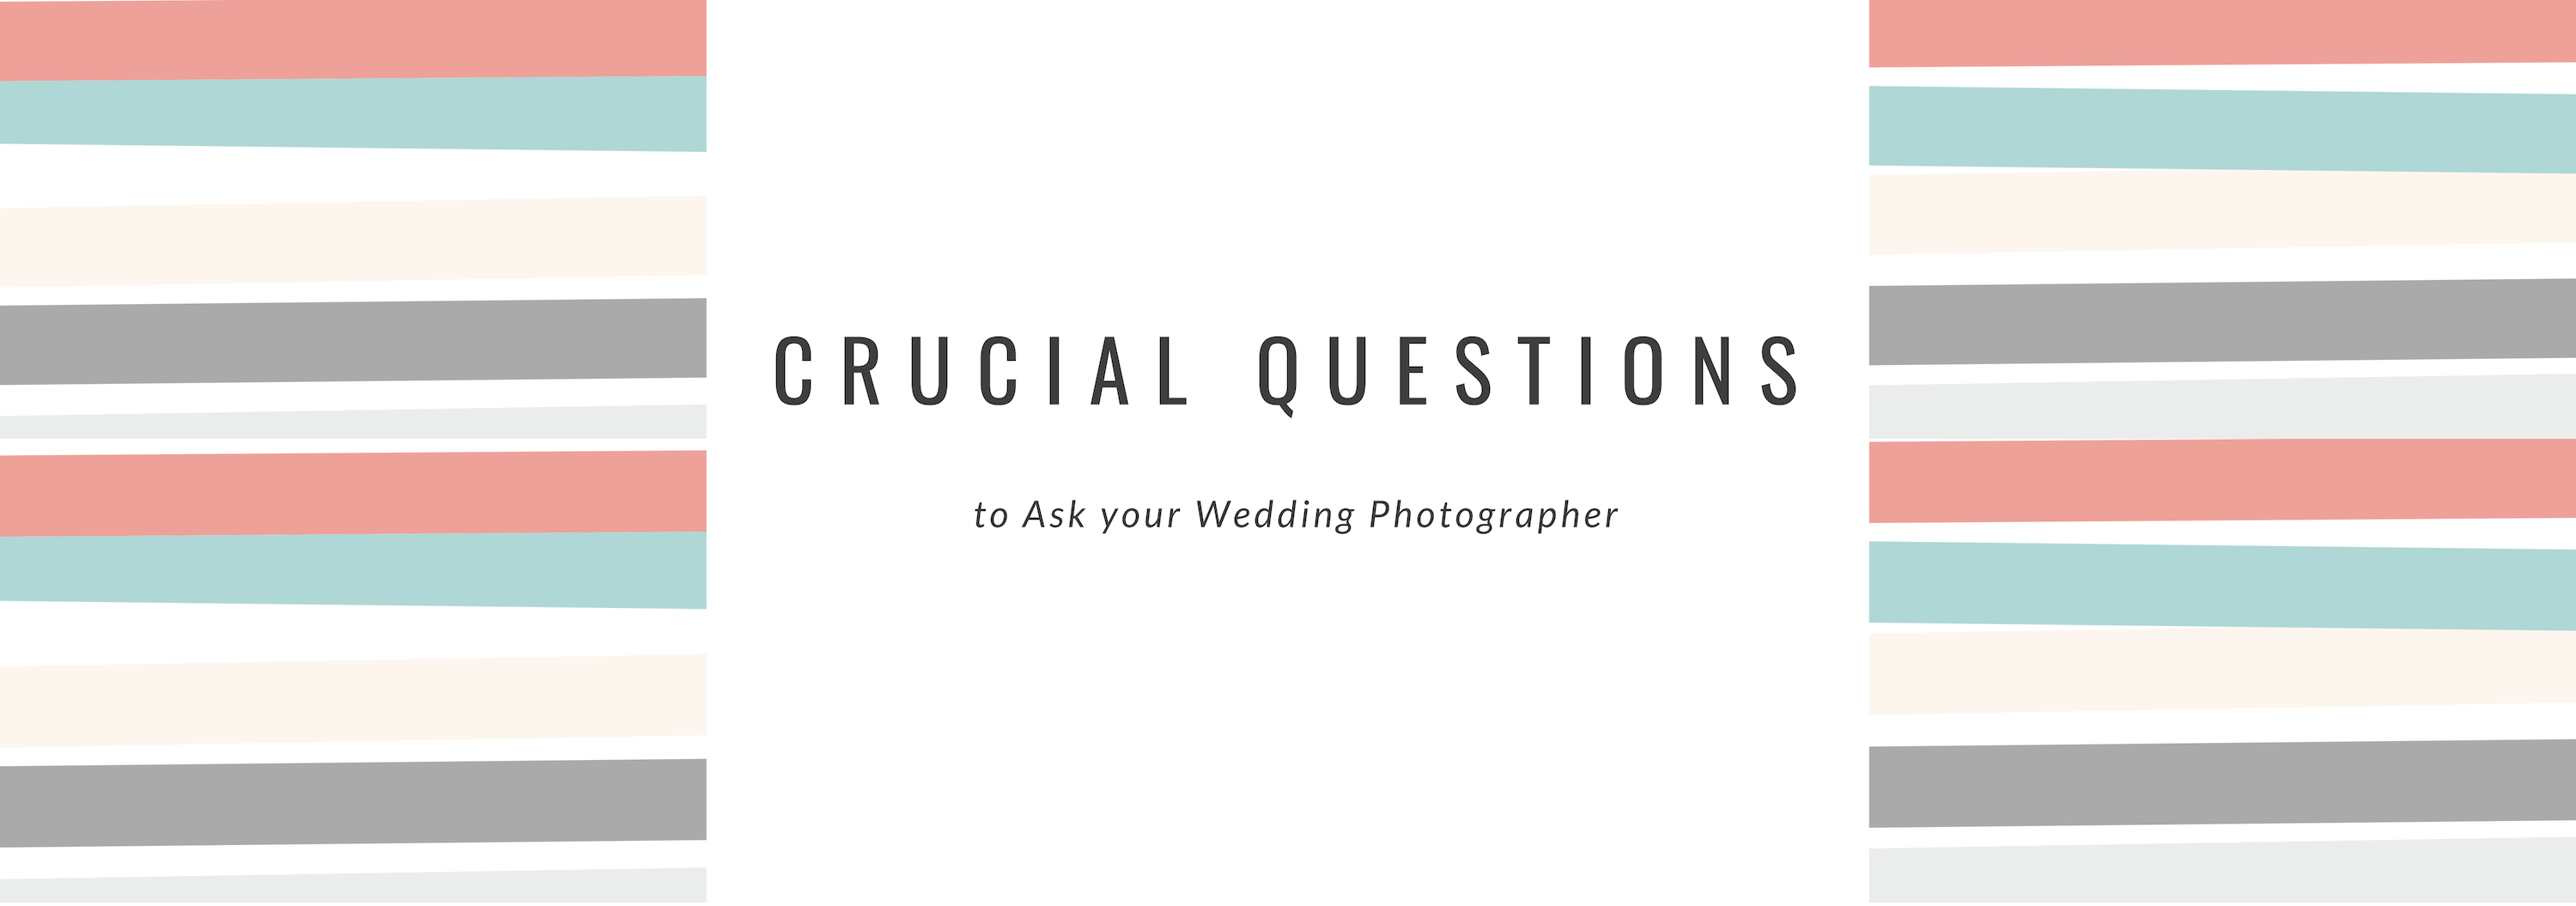 QUESTIONS FOR YOUR WEDDING PHOTOGRAPHER